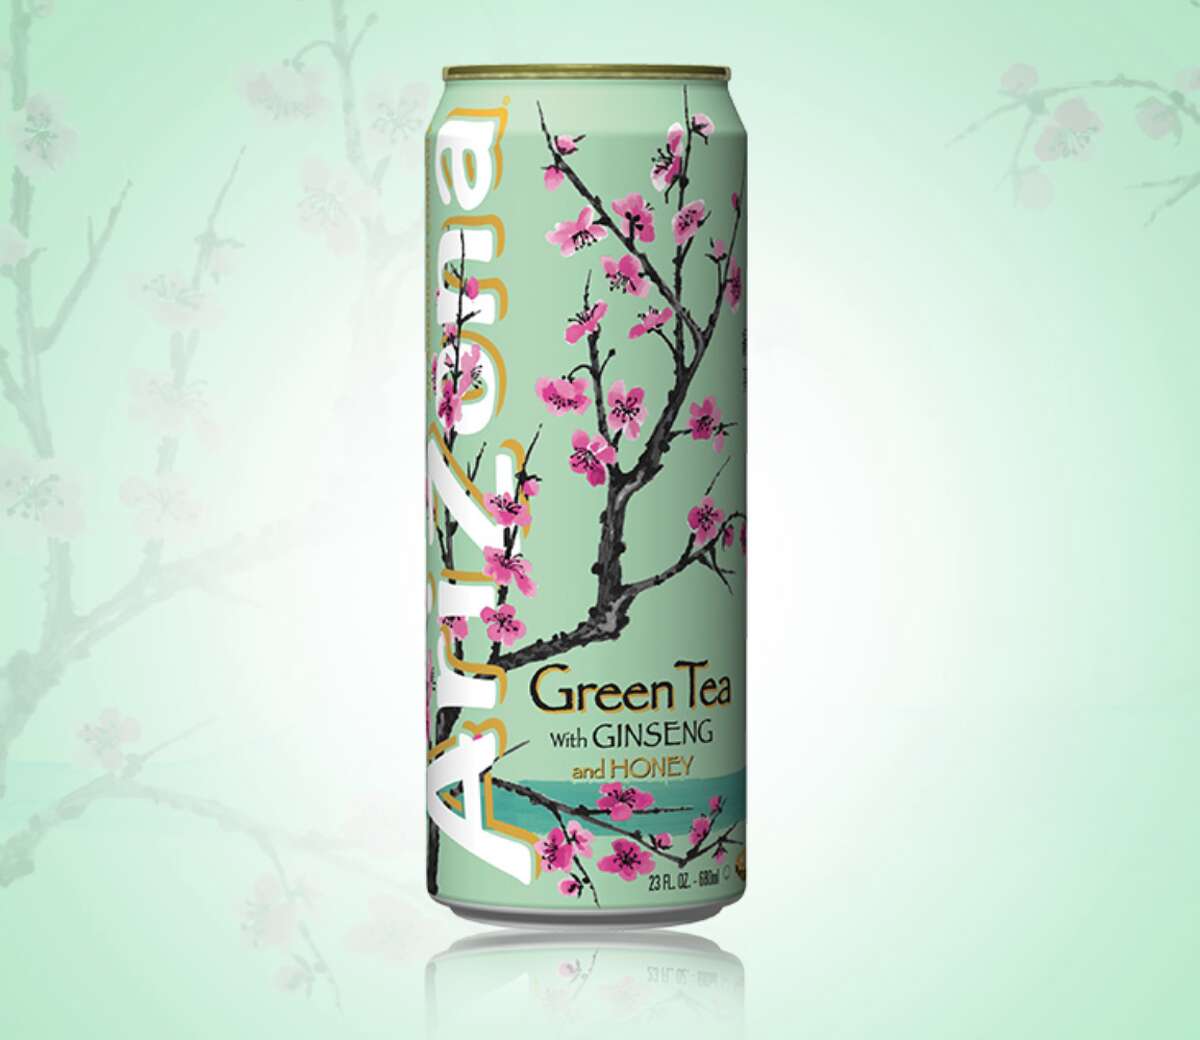 Arizona Iced Tea Being Sued For Falsely Labeling Green Tea With Nonexistent Ingredients